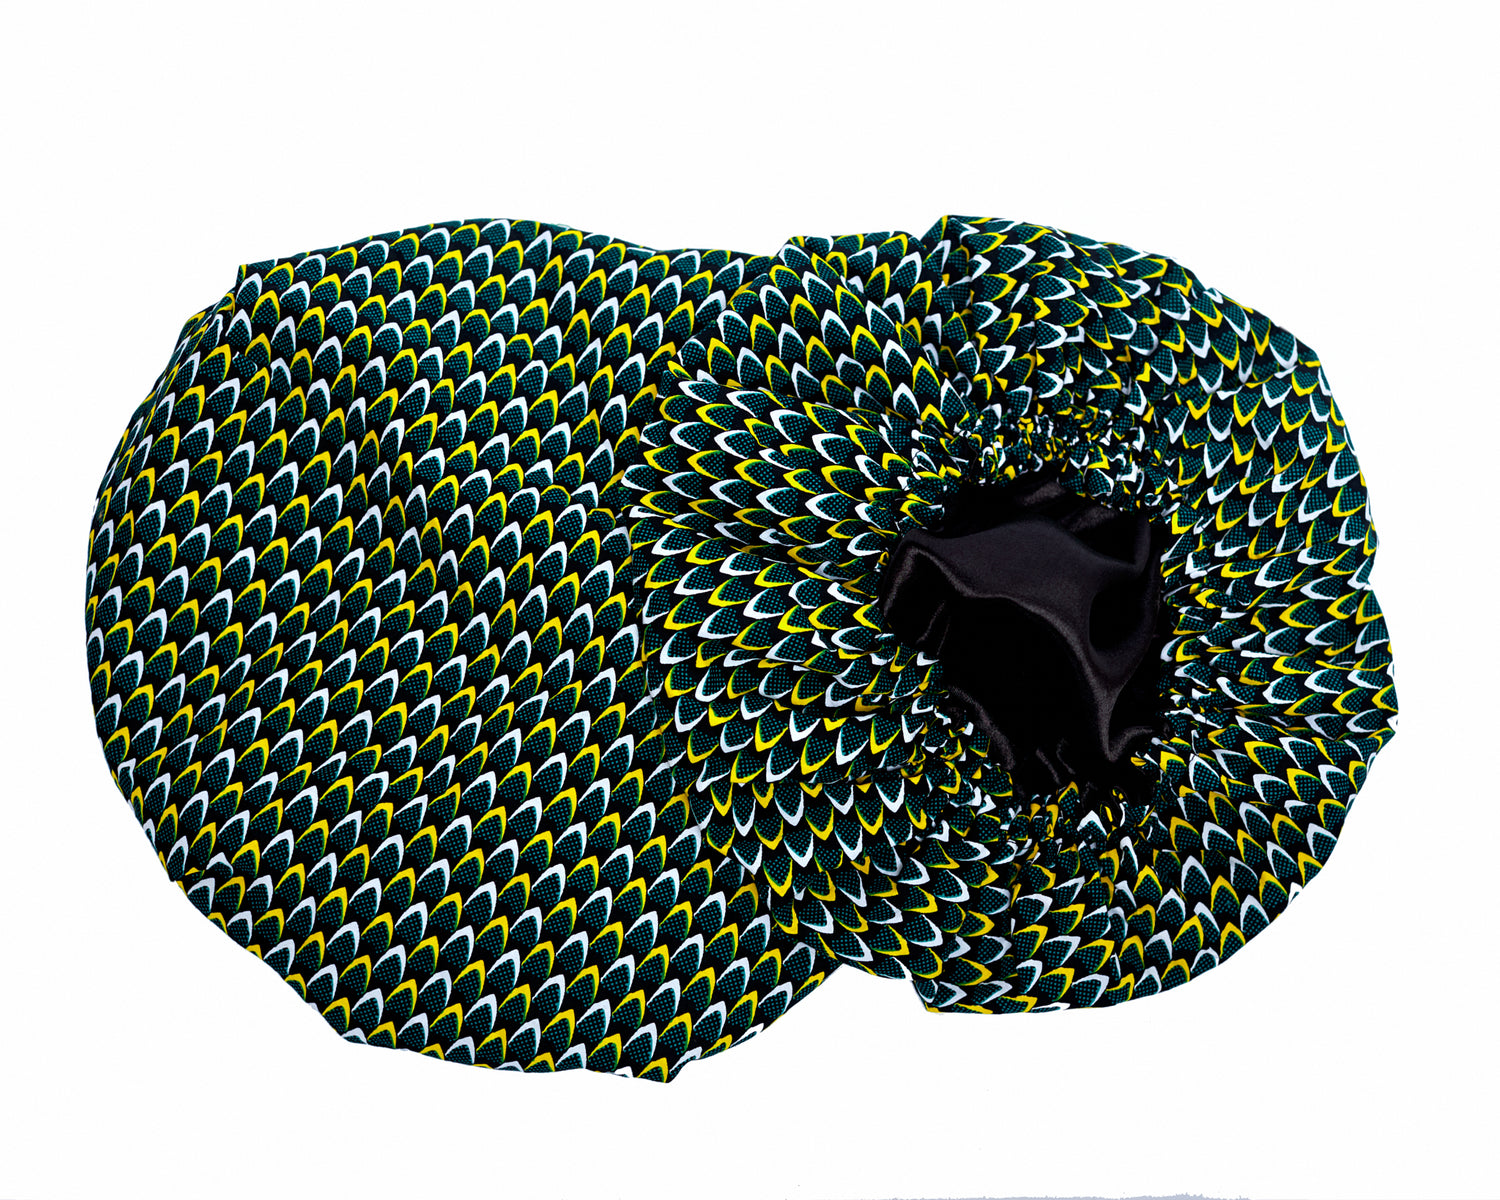 Ankara Wax Print Made of Green, Black,White, Yellow Blend of Beautiful Colours And Pattern, Hand Made Elastic With Black Silk lined Hair Bonnet